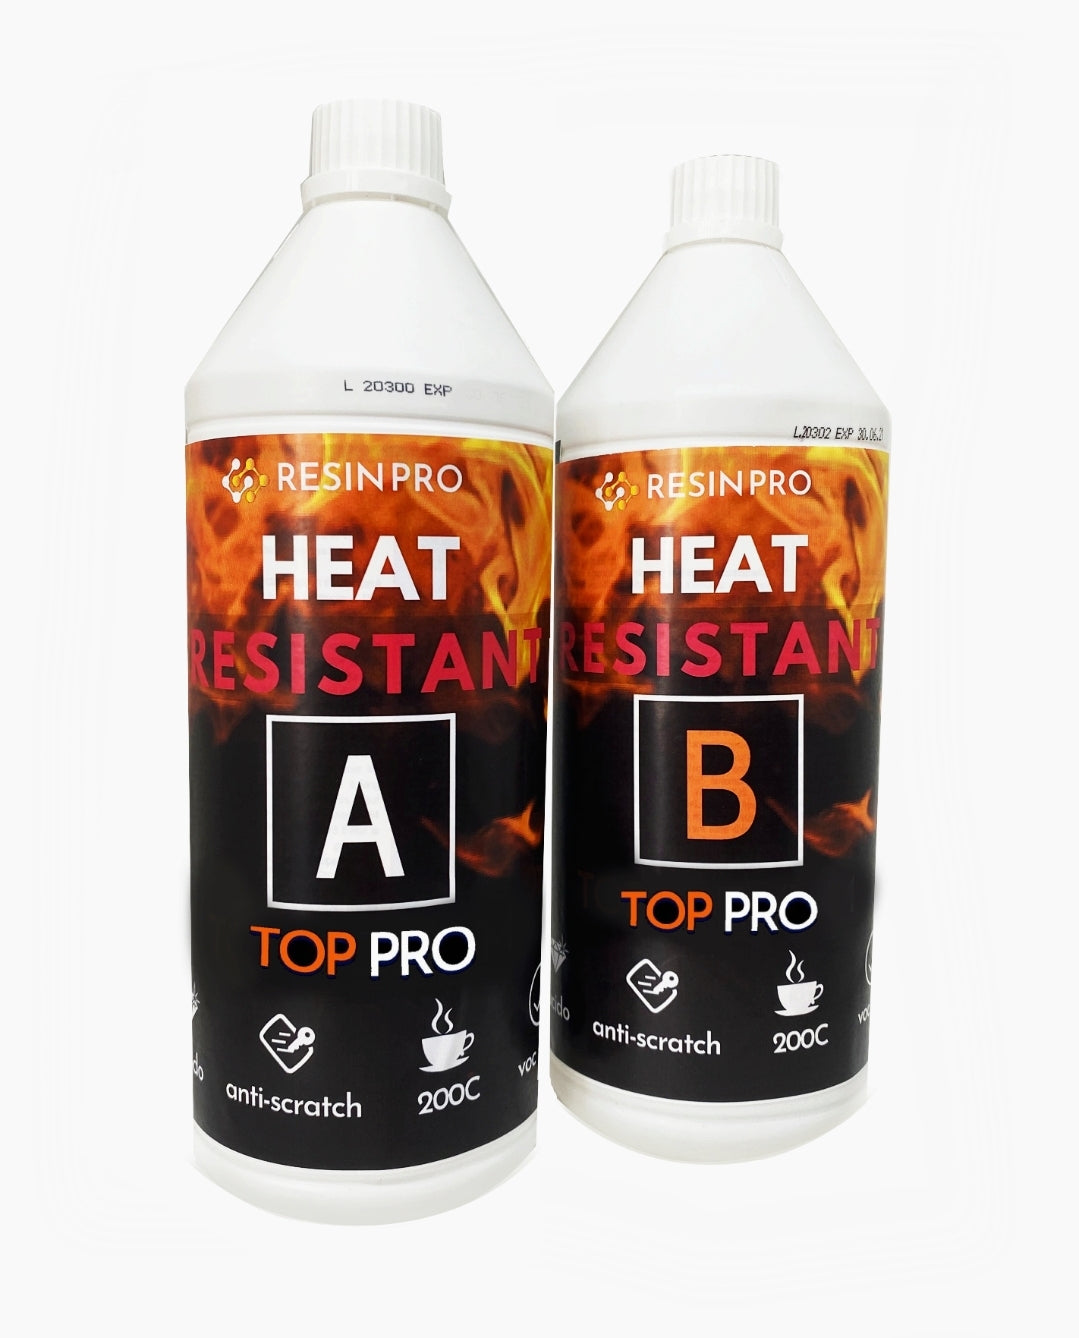 HEAT PRO - Flexible Heat-Resistant Anti-Scratch Glossy Coating - ResinPro  - Creativity at your service